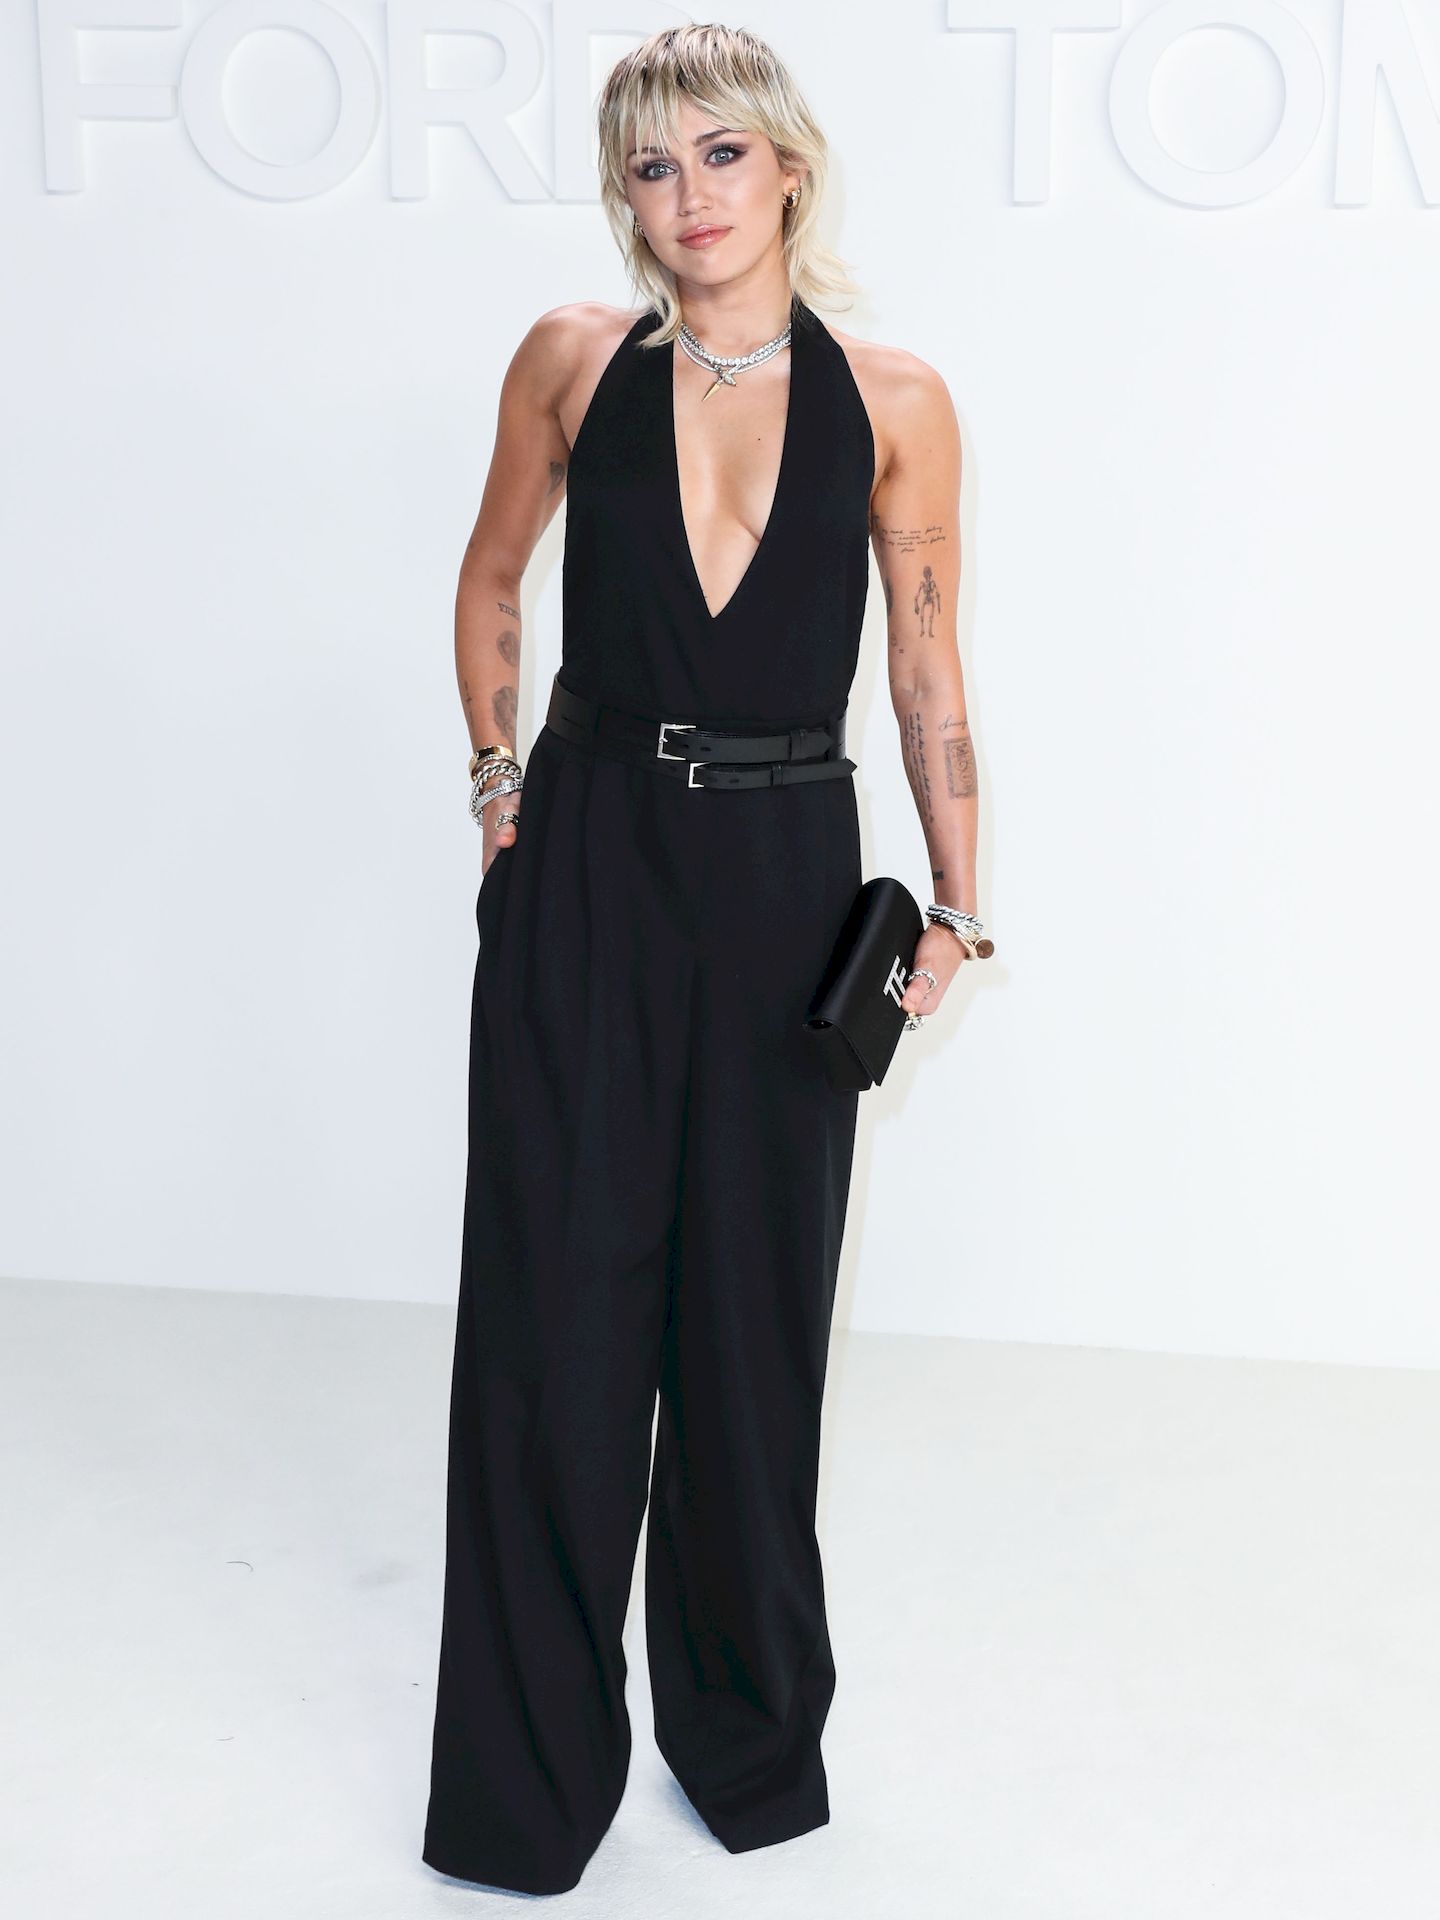 Miley-Cyrus-Looks-Sexy-at-the-Tom-Ford-Autumn_Winter-2020-Fashion-Show-0076.jpg